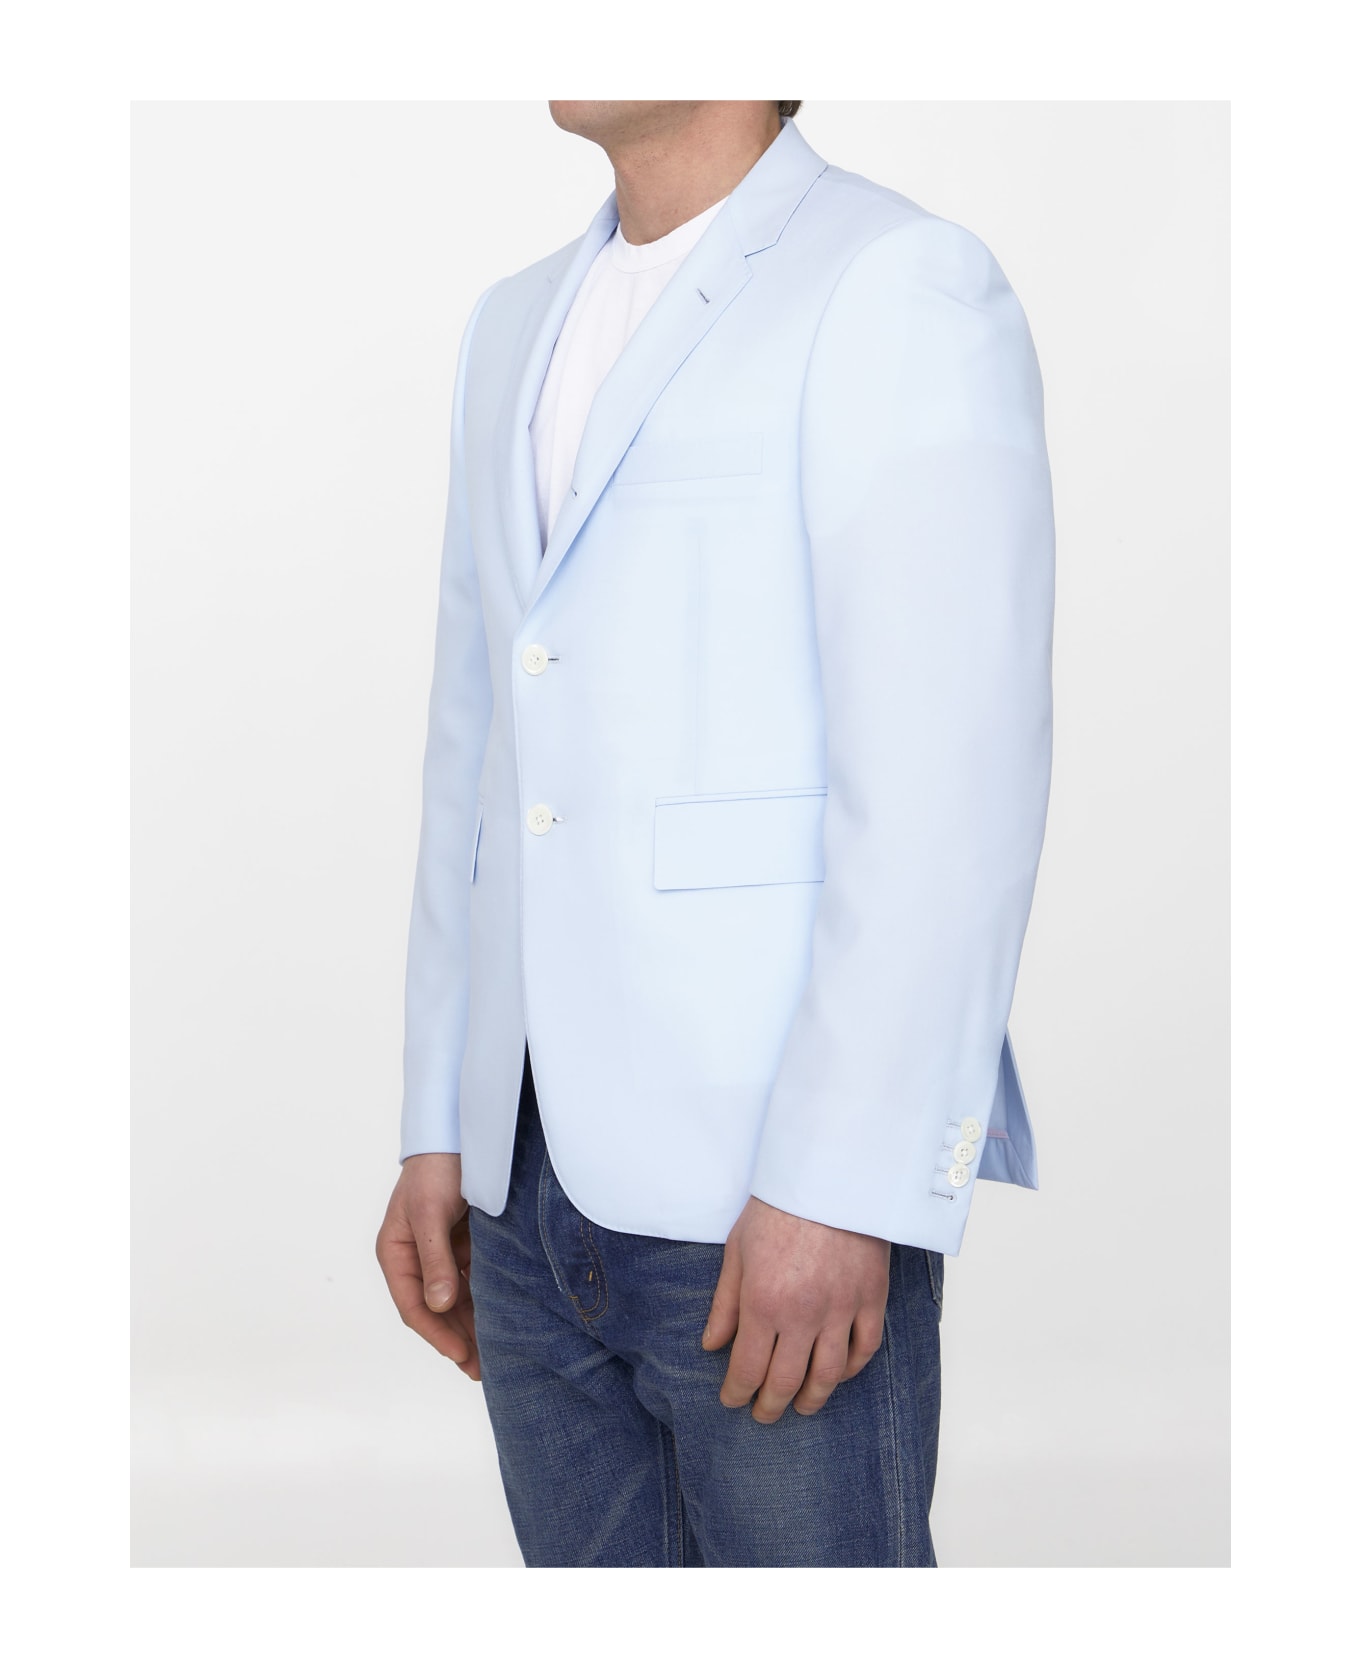 Thom Browne Single-breasted Wool Jacket - LIGHT BLUE ブレザー